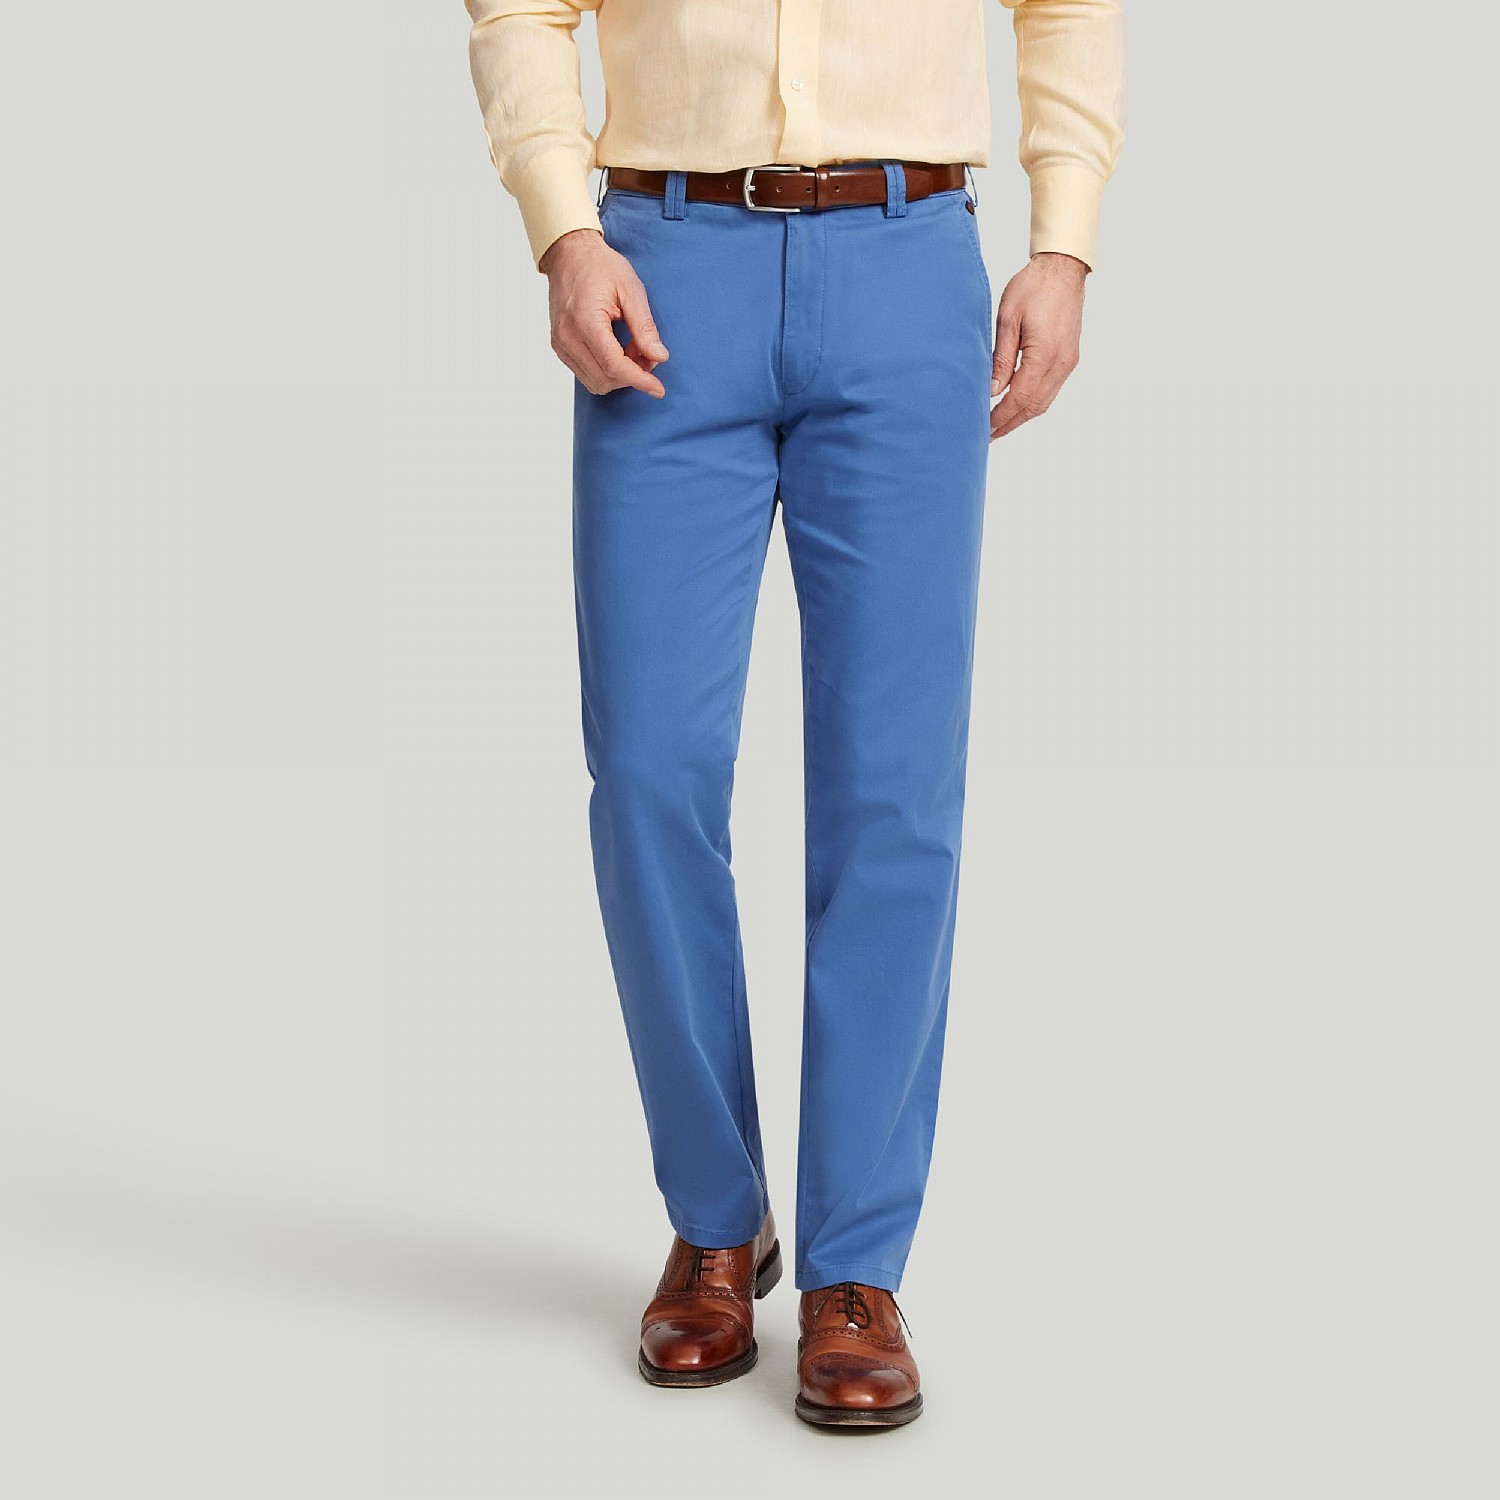 Buy mens trousers and chinos online  MEYERtrousers